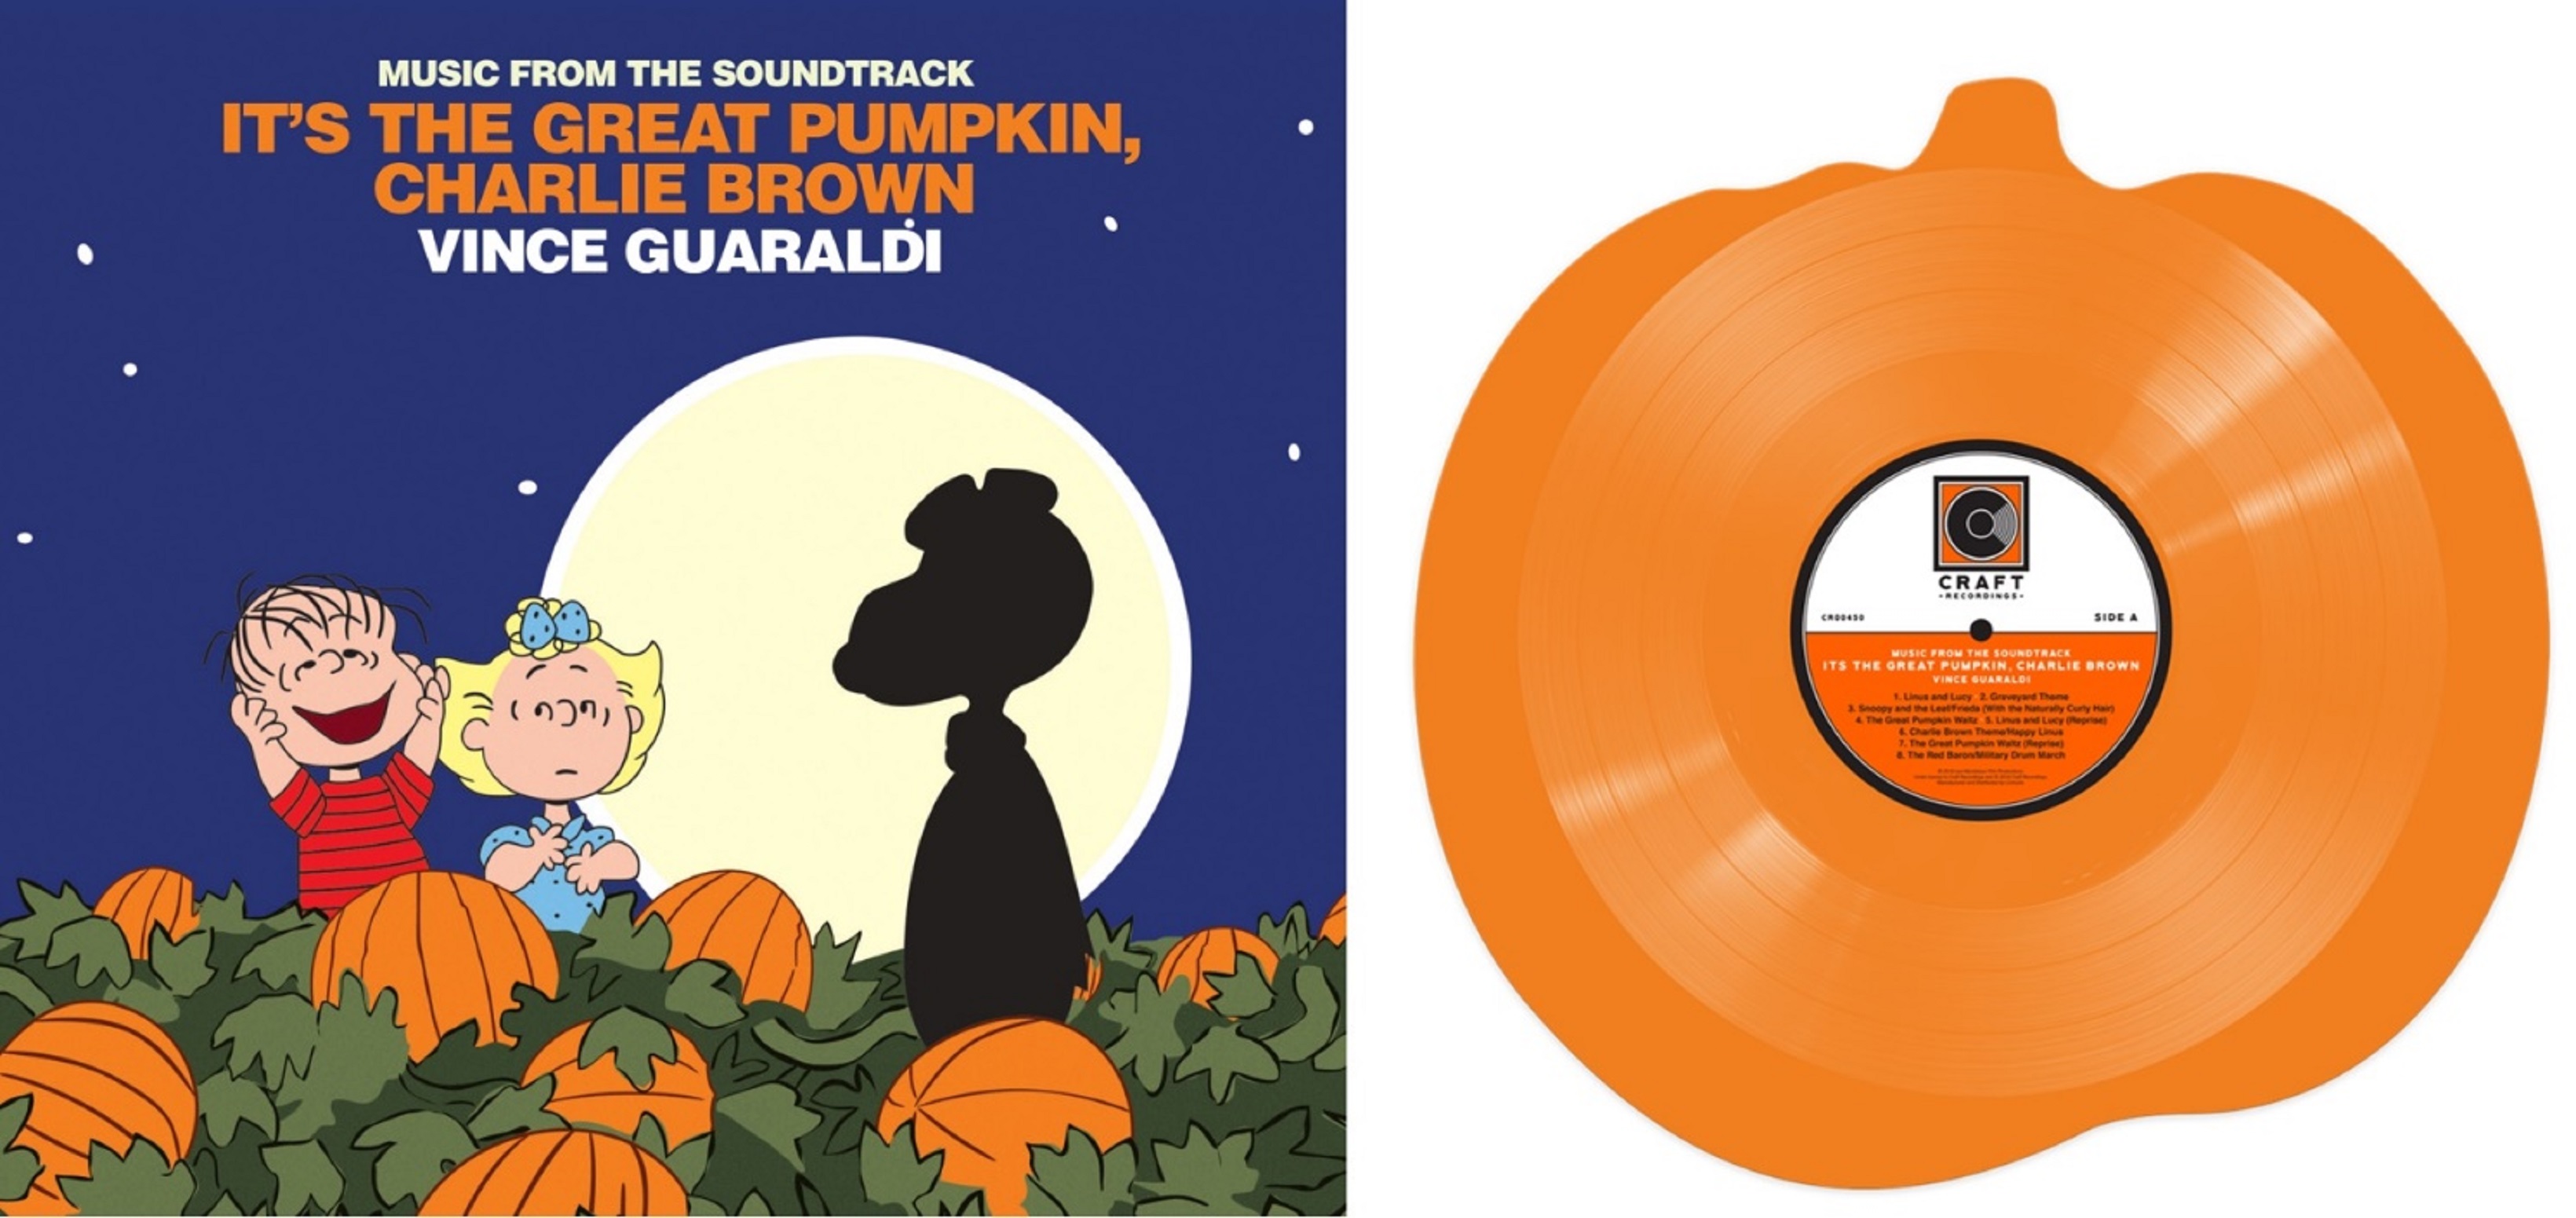 MUSIC FROM IT’S THE GREAT PUMPKIN, CHARLIE BROWN SOUNDTRACK SET FOR COLLECTIBLE, PUMPKIN-SHAPED VINYL RELEASE